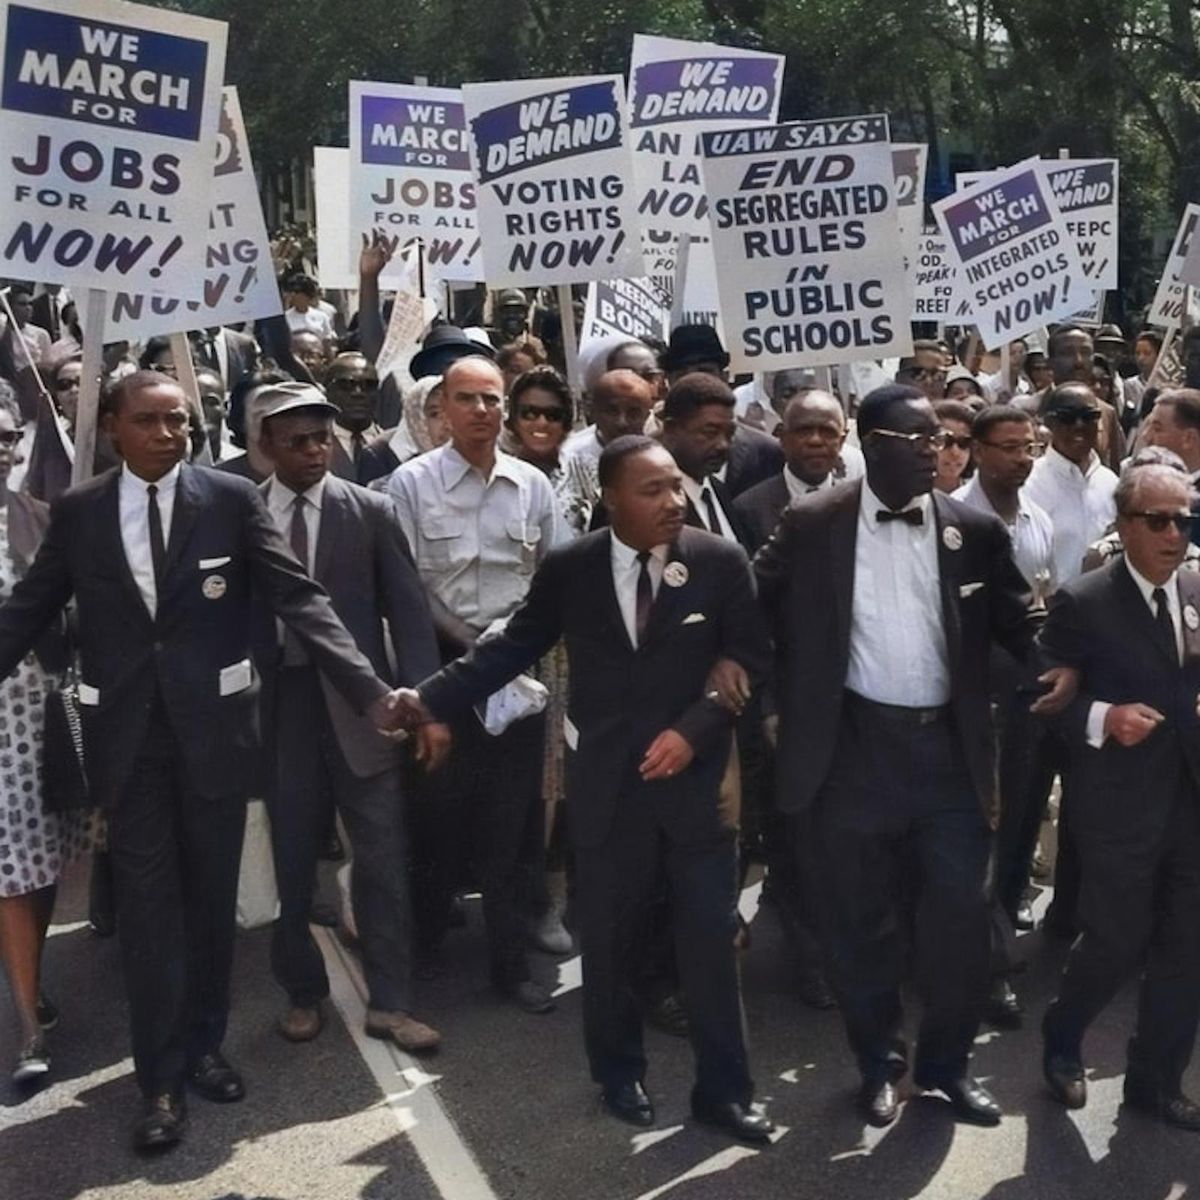 Dr. King in a civil rights march Martin Luther King Jr. Day